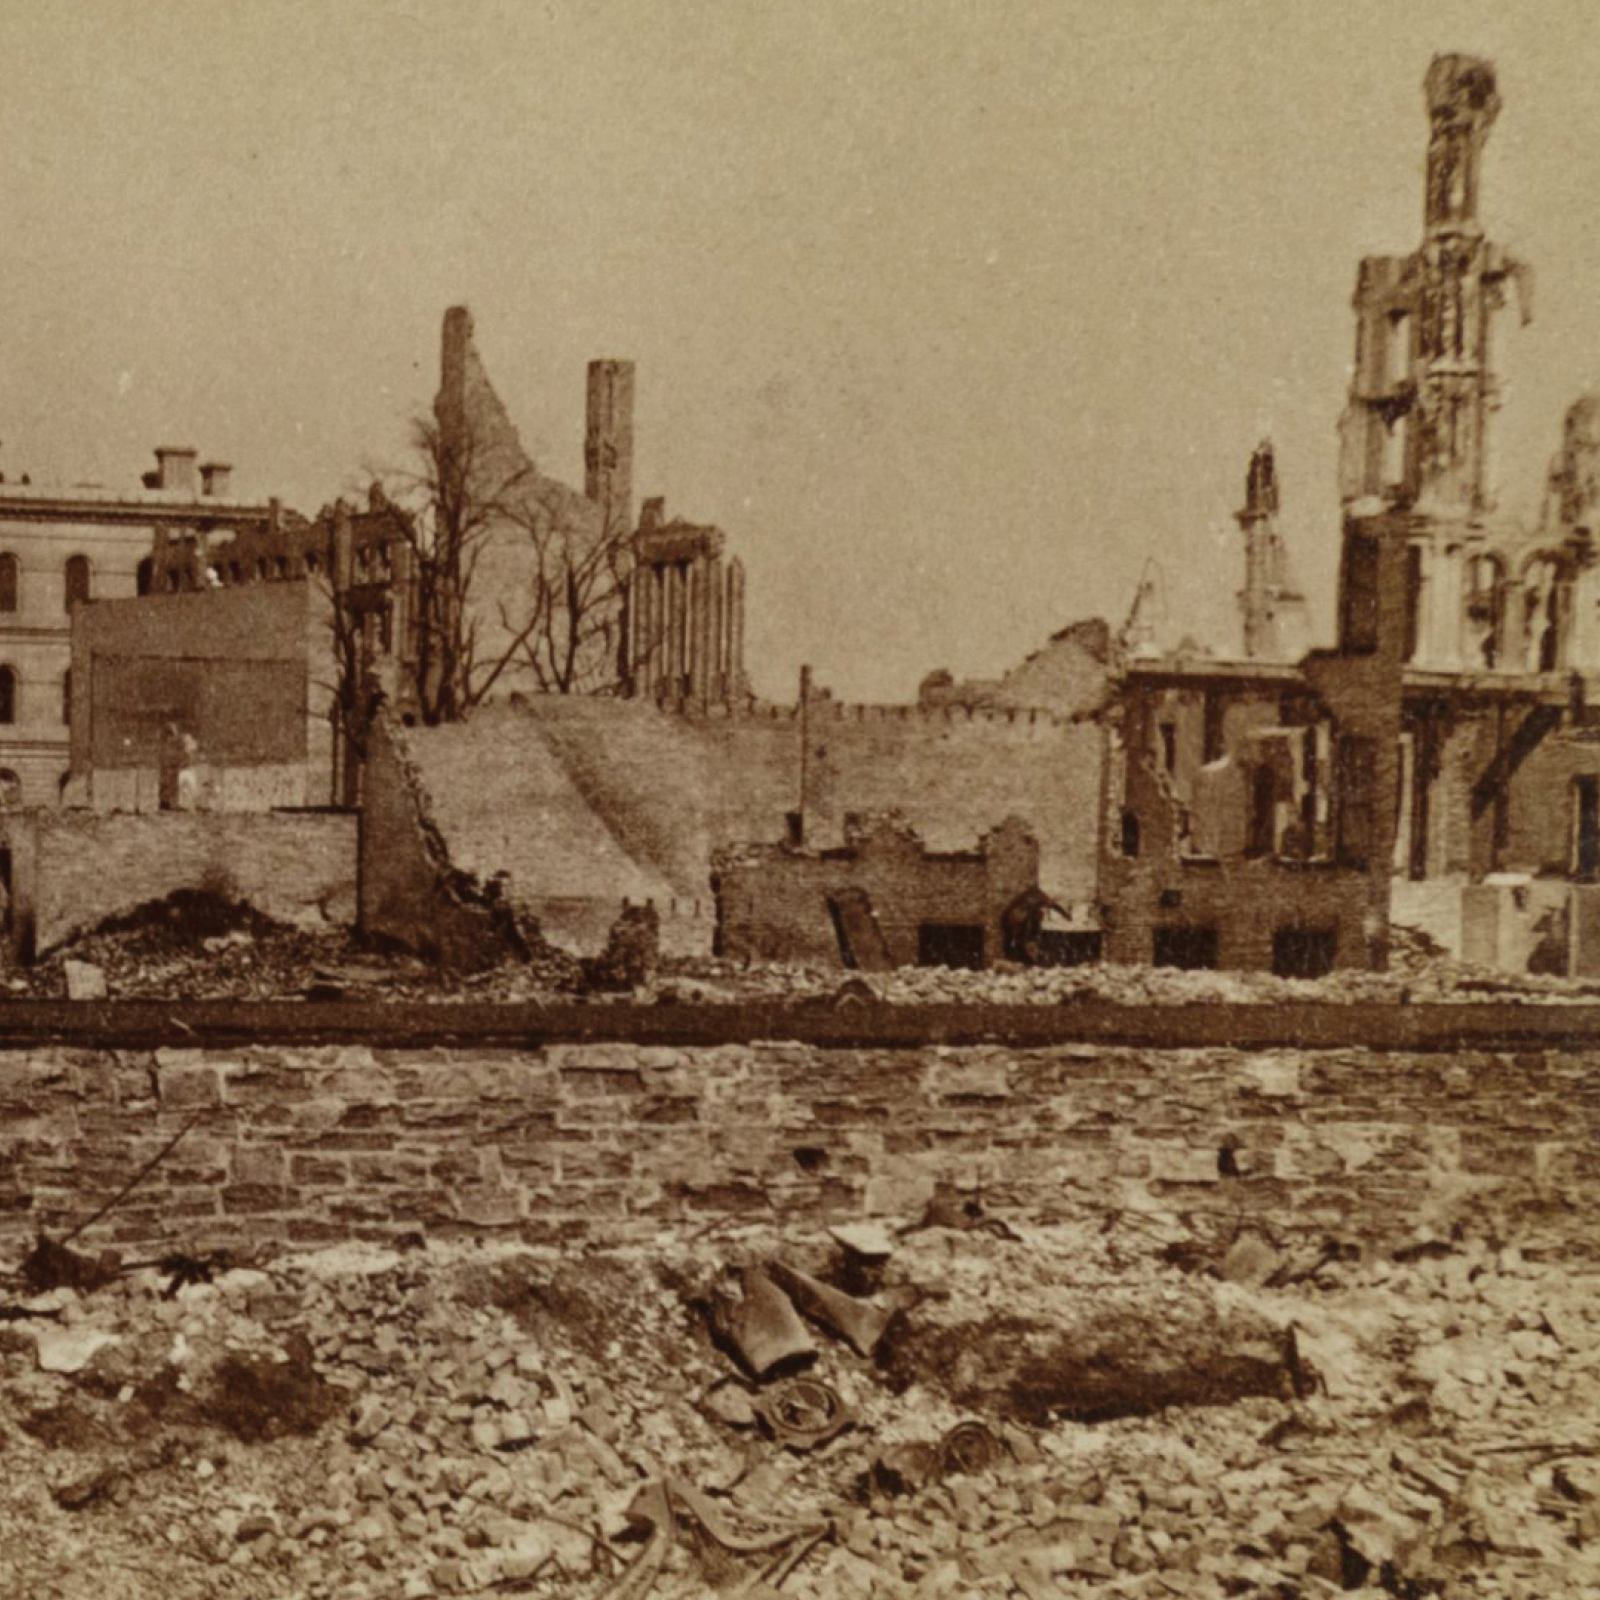 Photograph showing the aftermath of the Great Chicago Fire. From the Oliver Barrett-Carl Sandburg Papers at the Newberry Library.